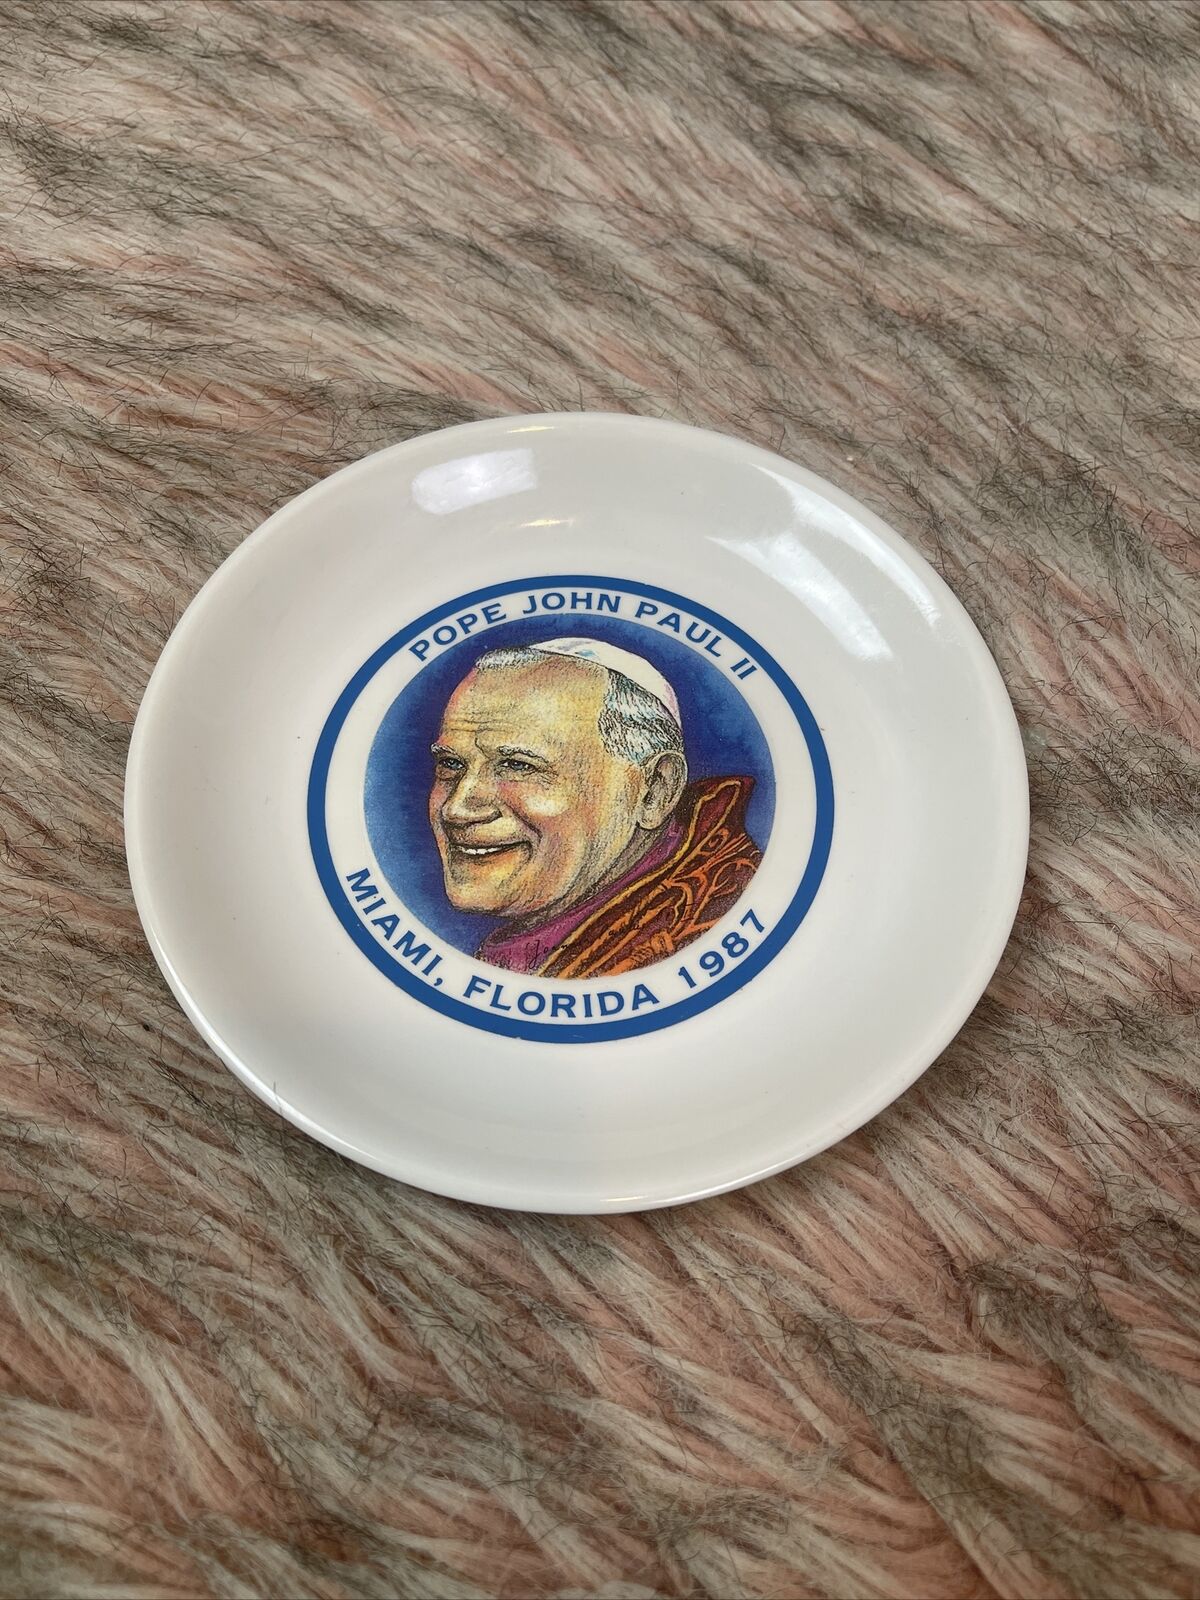 Vintage Pope John Paul II Collector’s Plate Miami, Florida 1987- Limited Edition